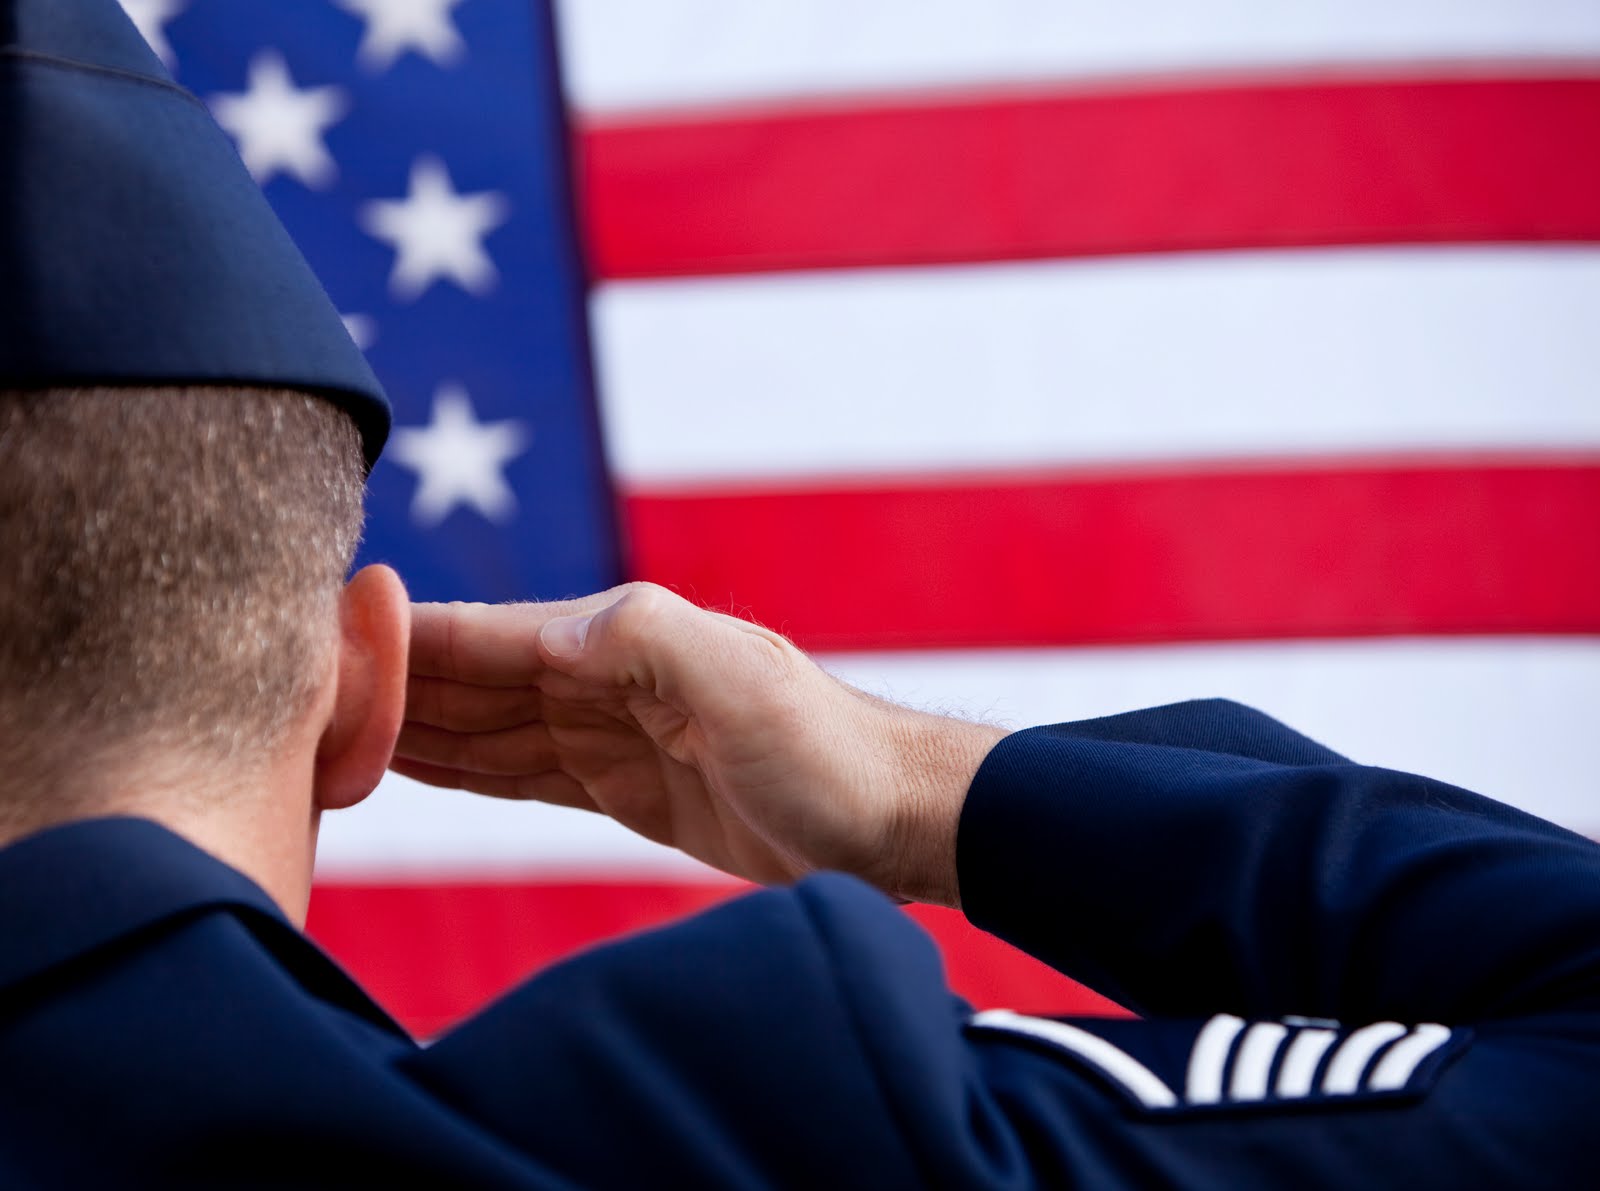 A photo of an Air Force member saluting the American flag